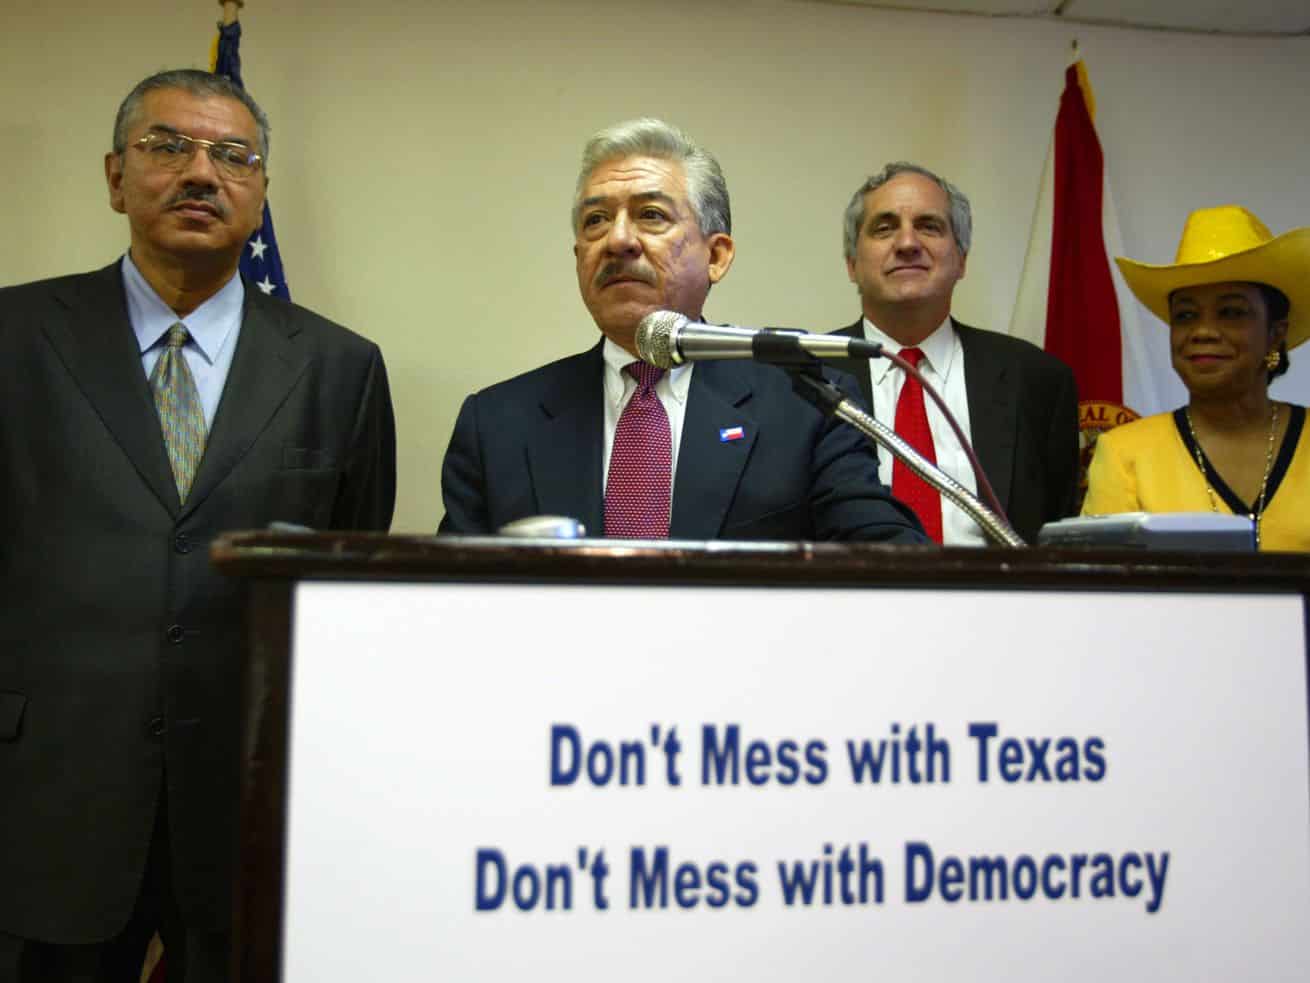 The GOP voting bill that literally caused Texas Democrats to flee the state, explained